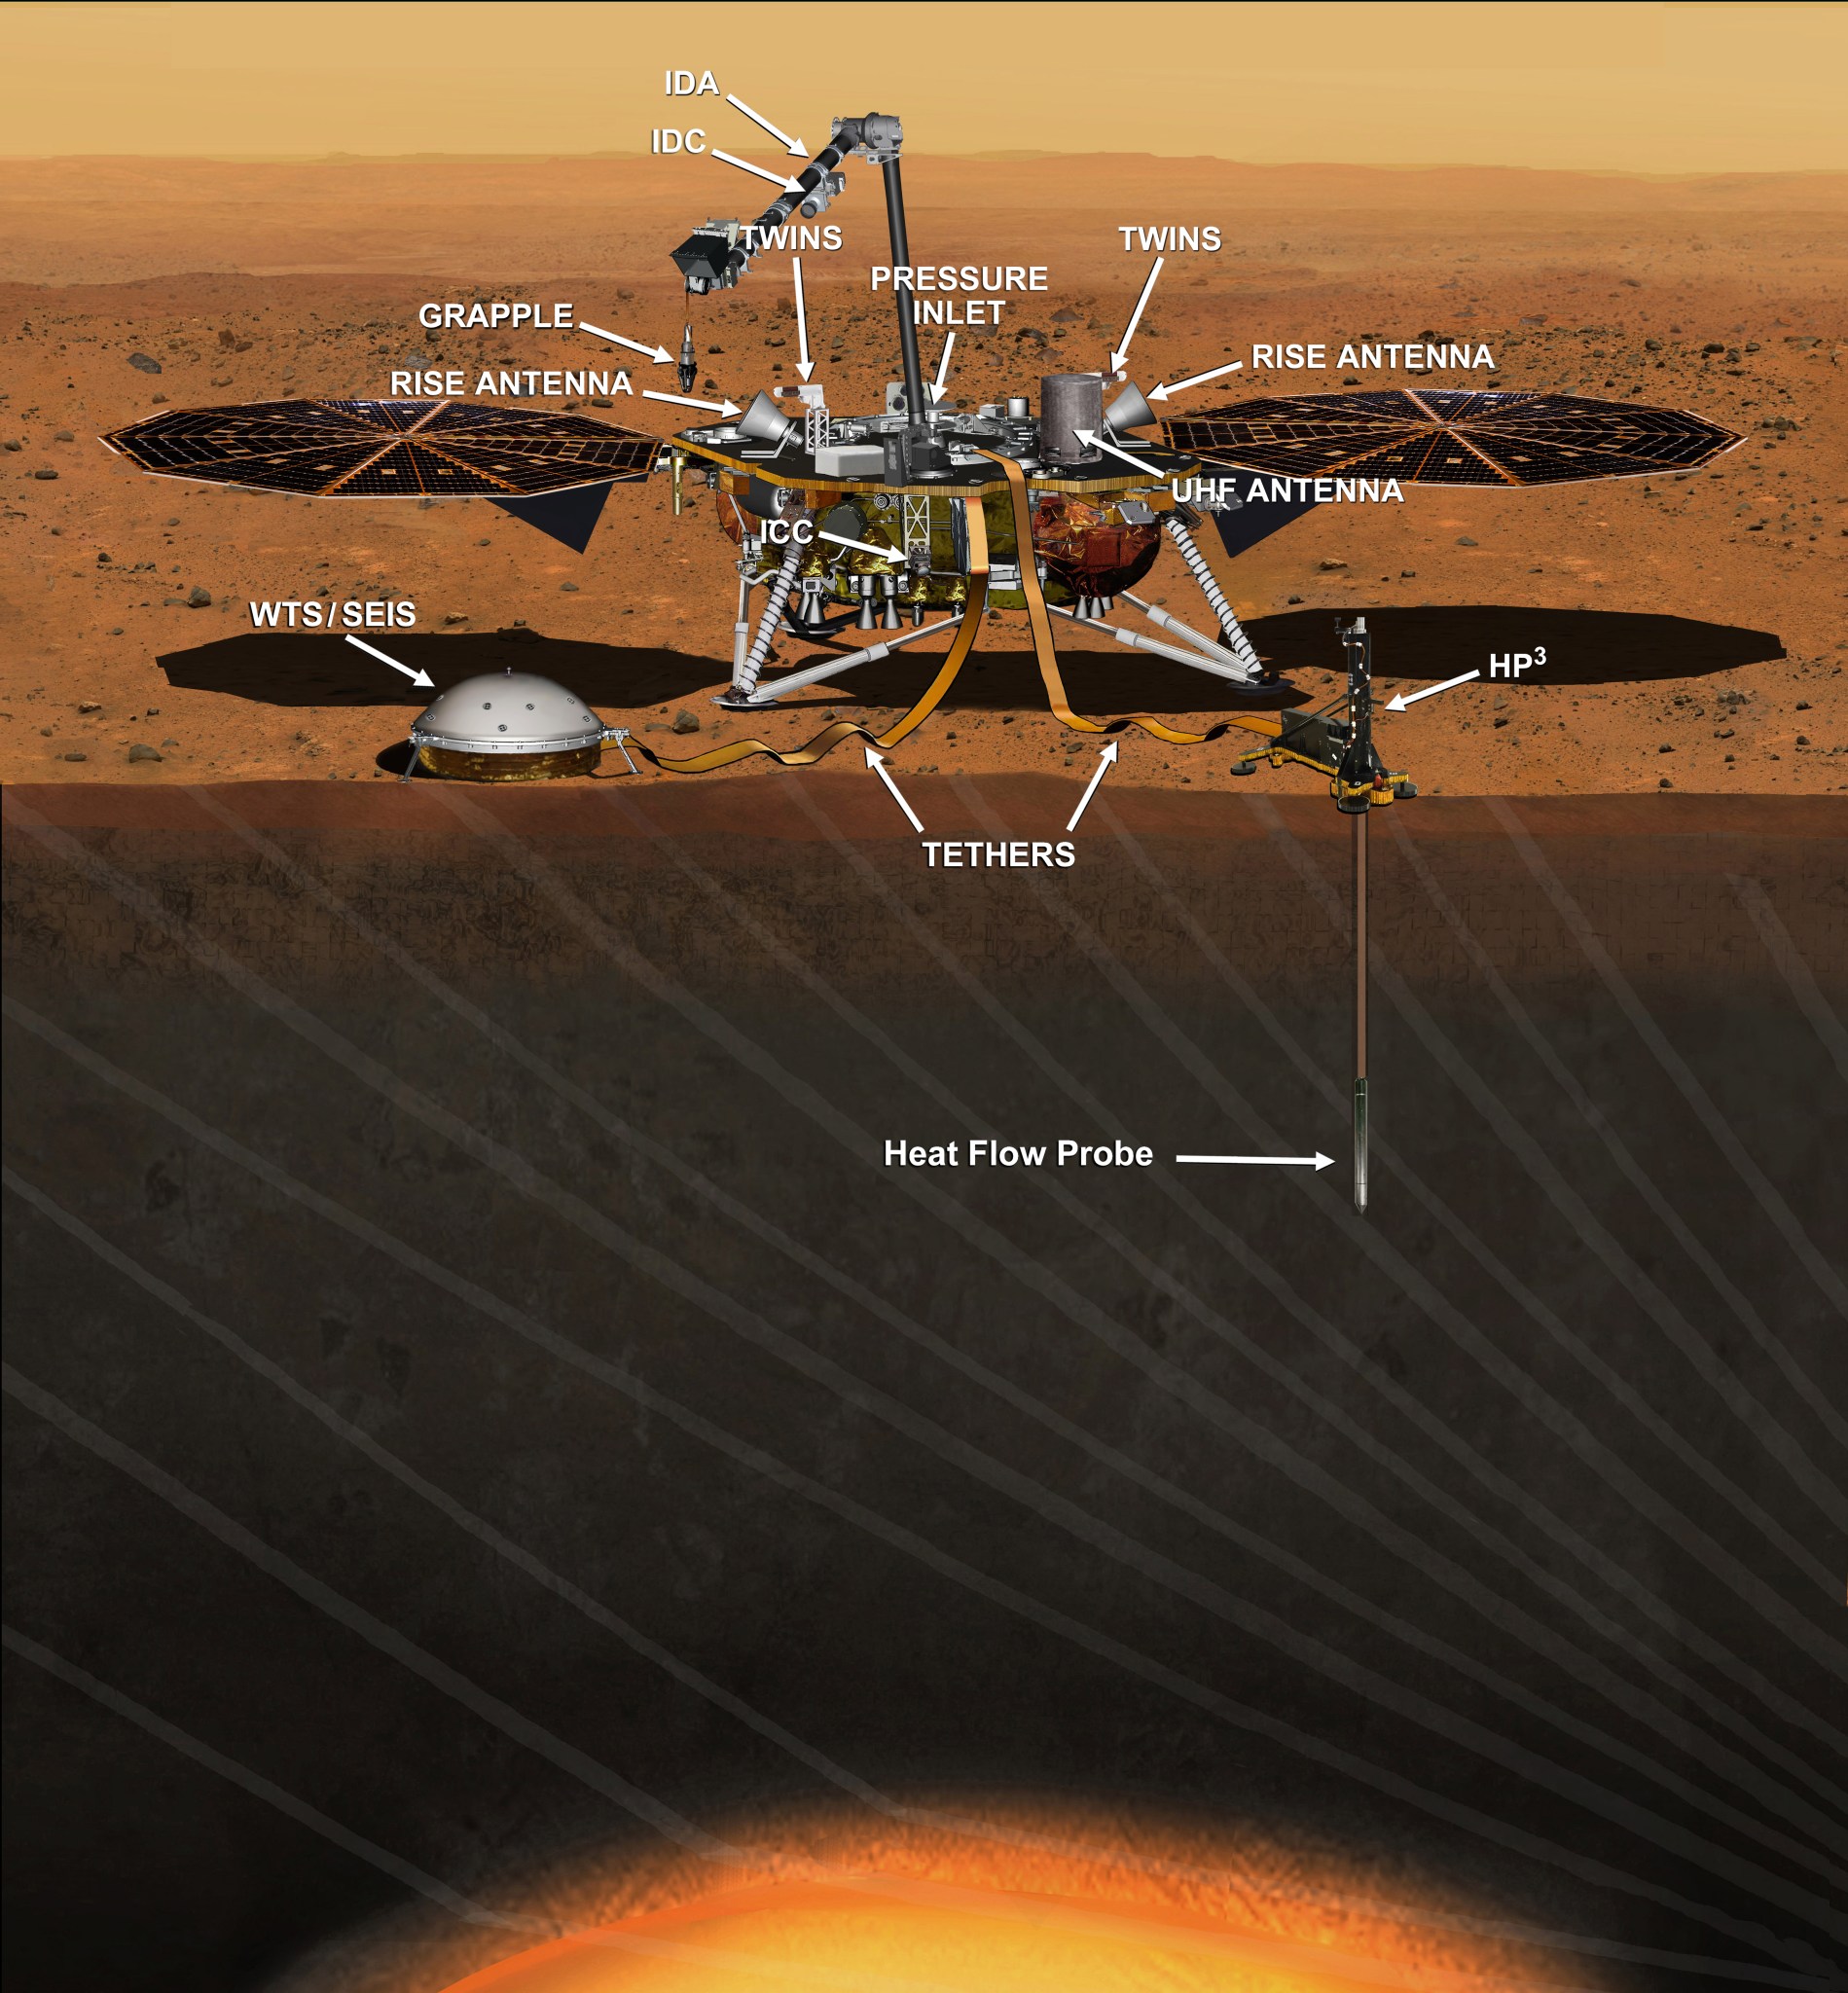 Artist's Concept of InSight Lander on Mars - Annotated